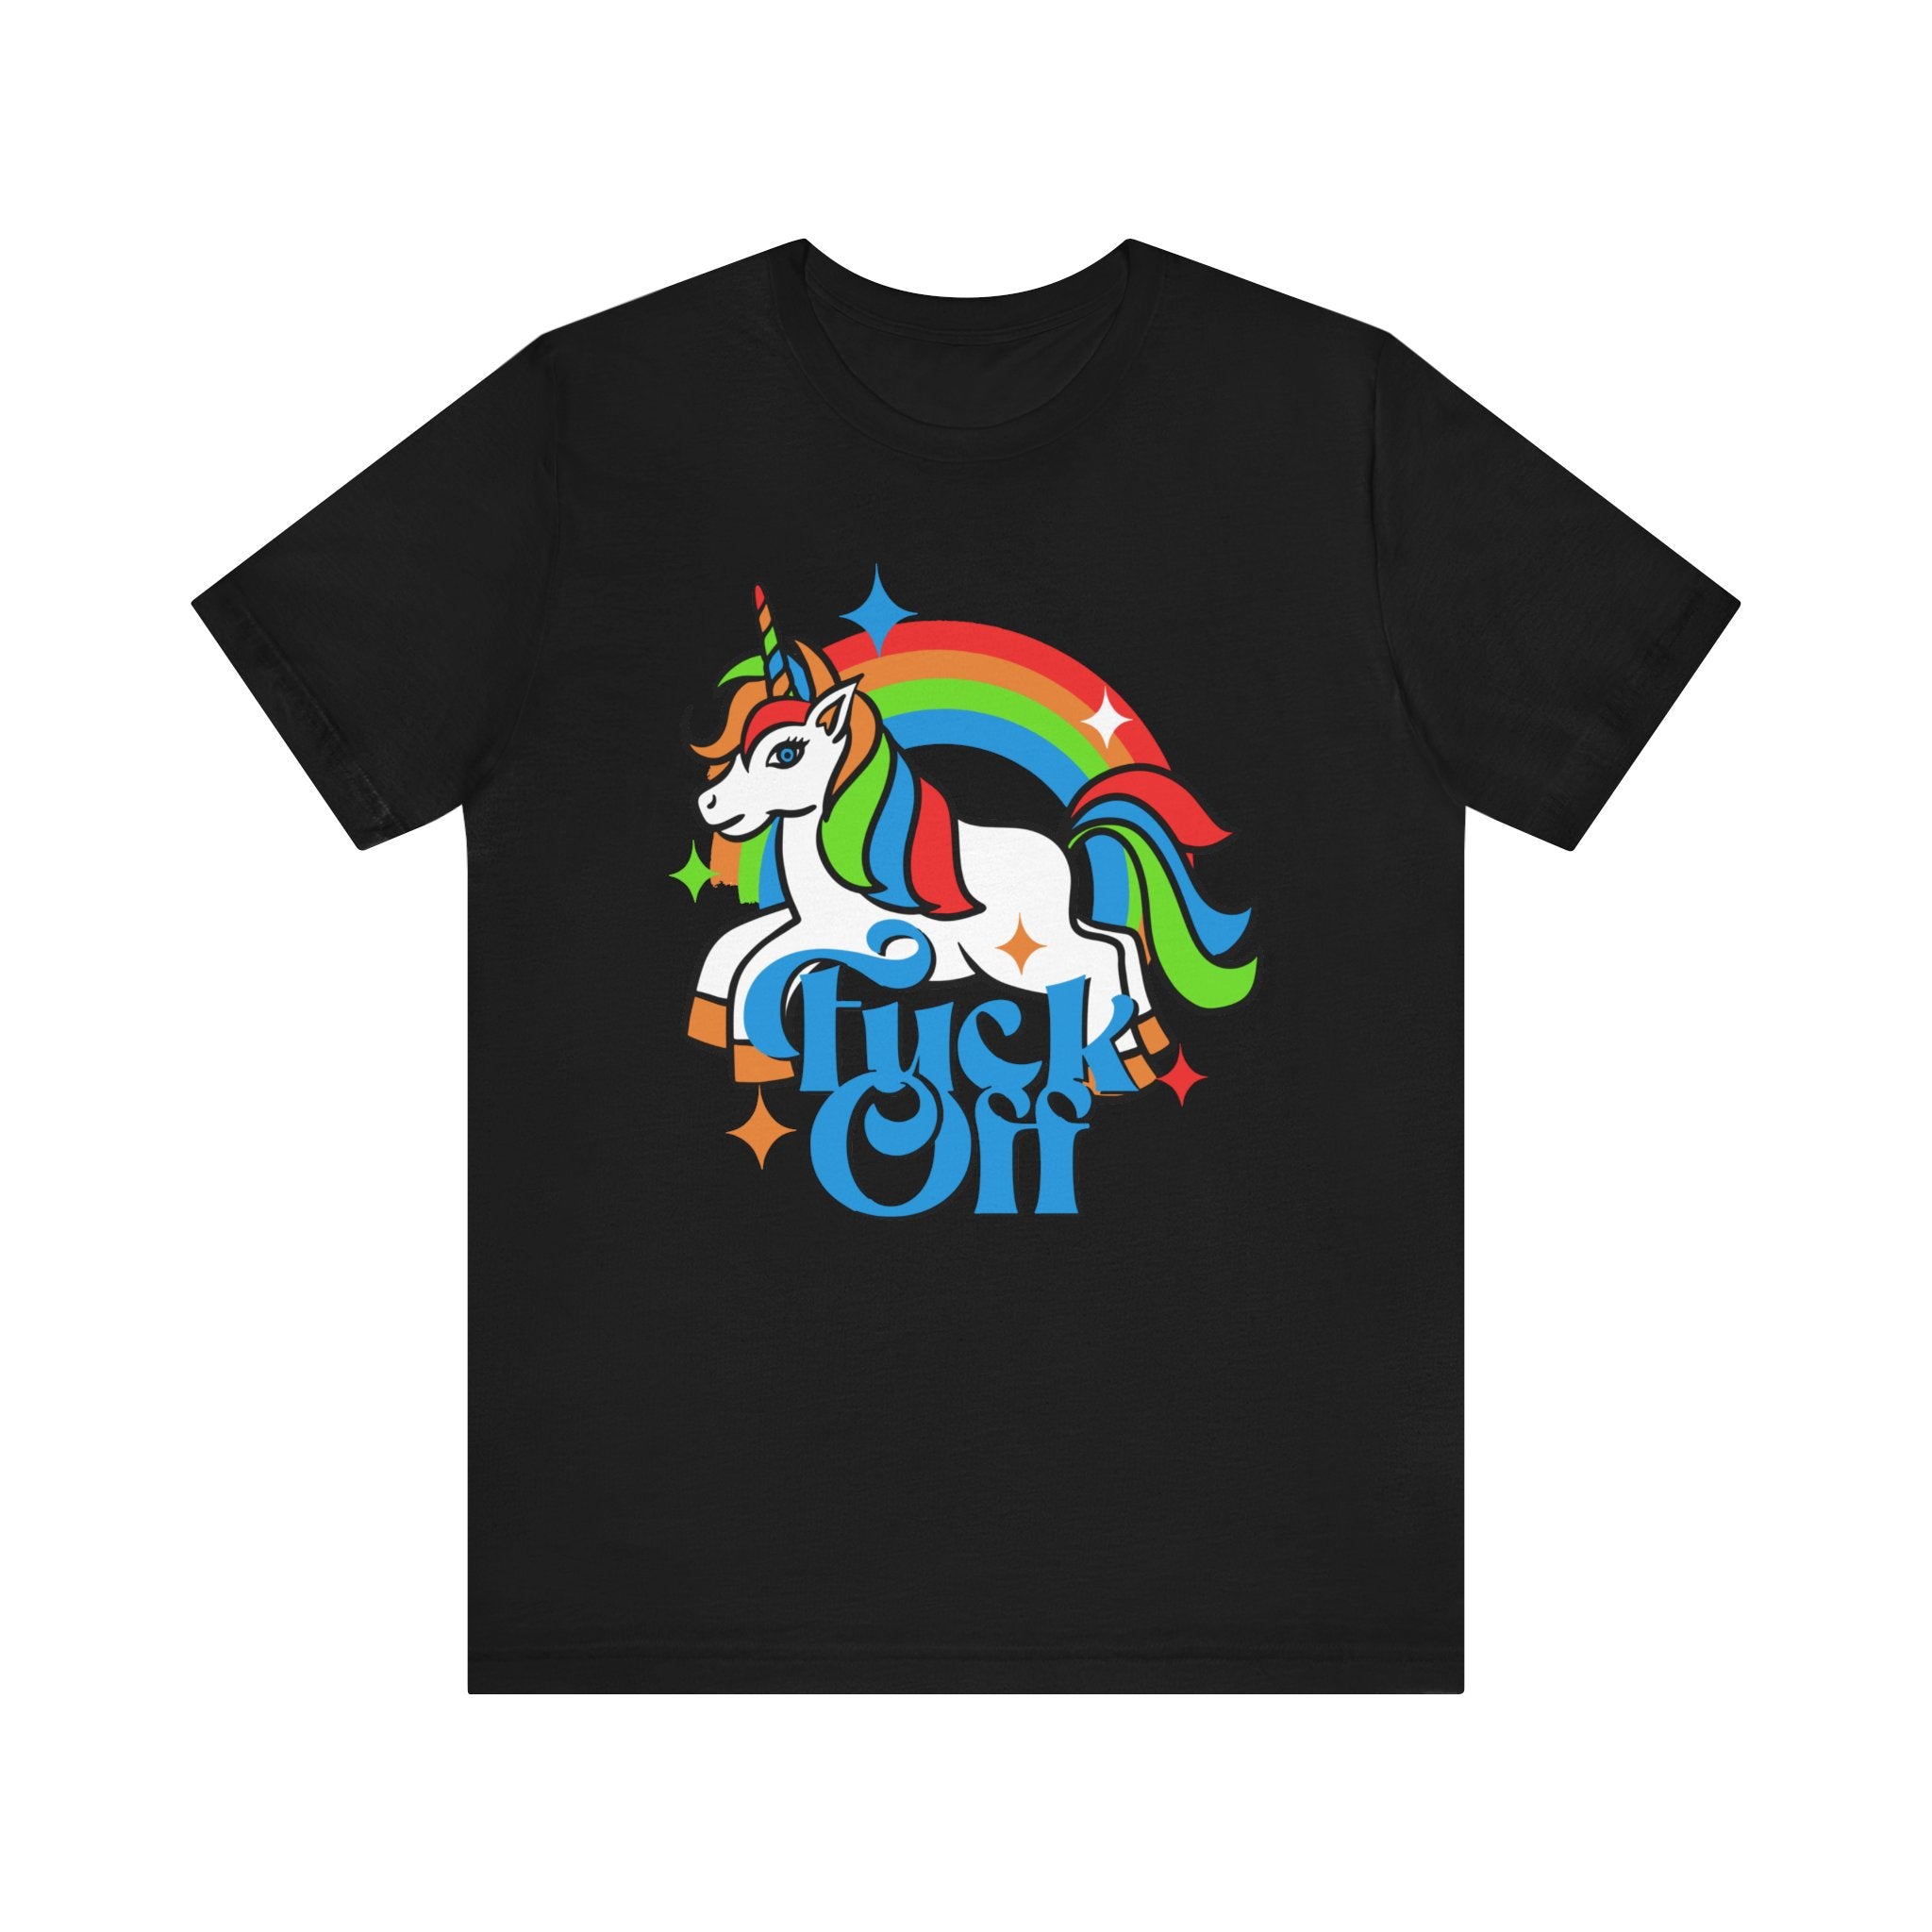 A black, unisex F off t-shirt featuring a colorful graphic of a unicorn with a rainbow mane and the text "tush off" in bold, stylized font surrounded by stars.